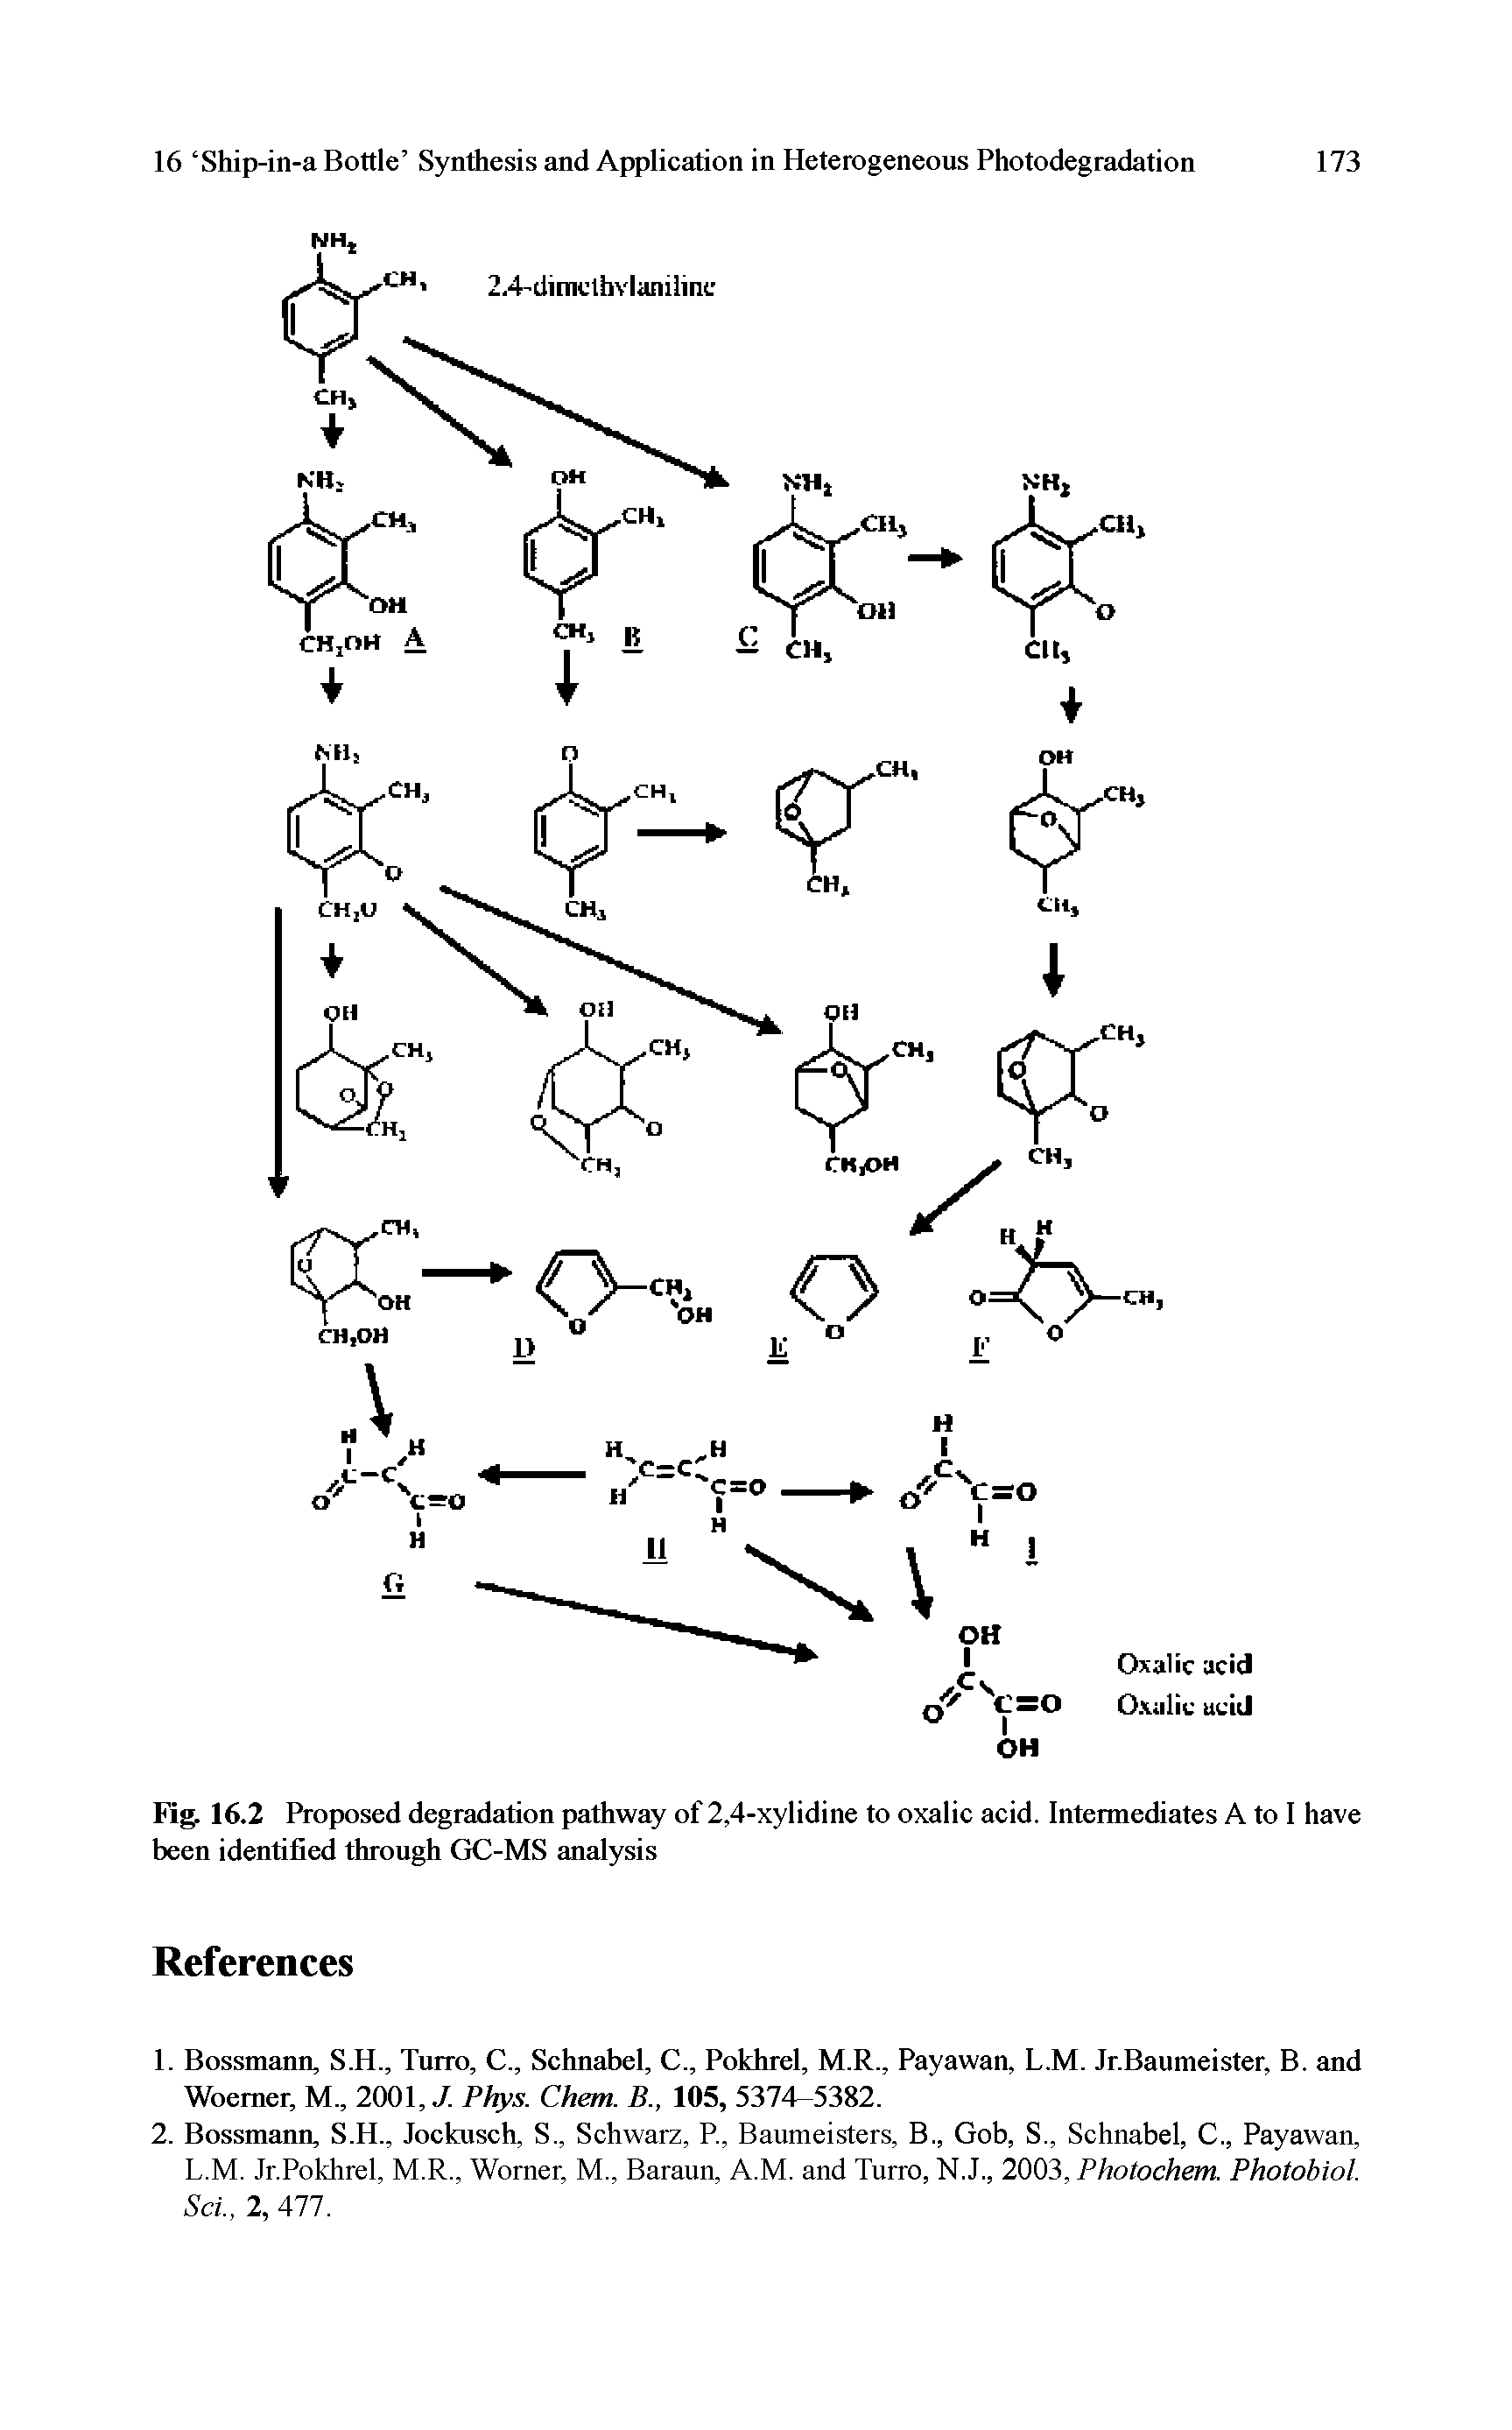 Fig. 16.2 Proposed degradation pathway of 2,4-xylidine to oxalic acid. Intermediates A to I have been identified through GC-MS analysis...